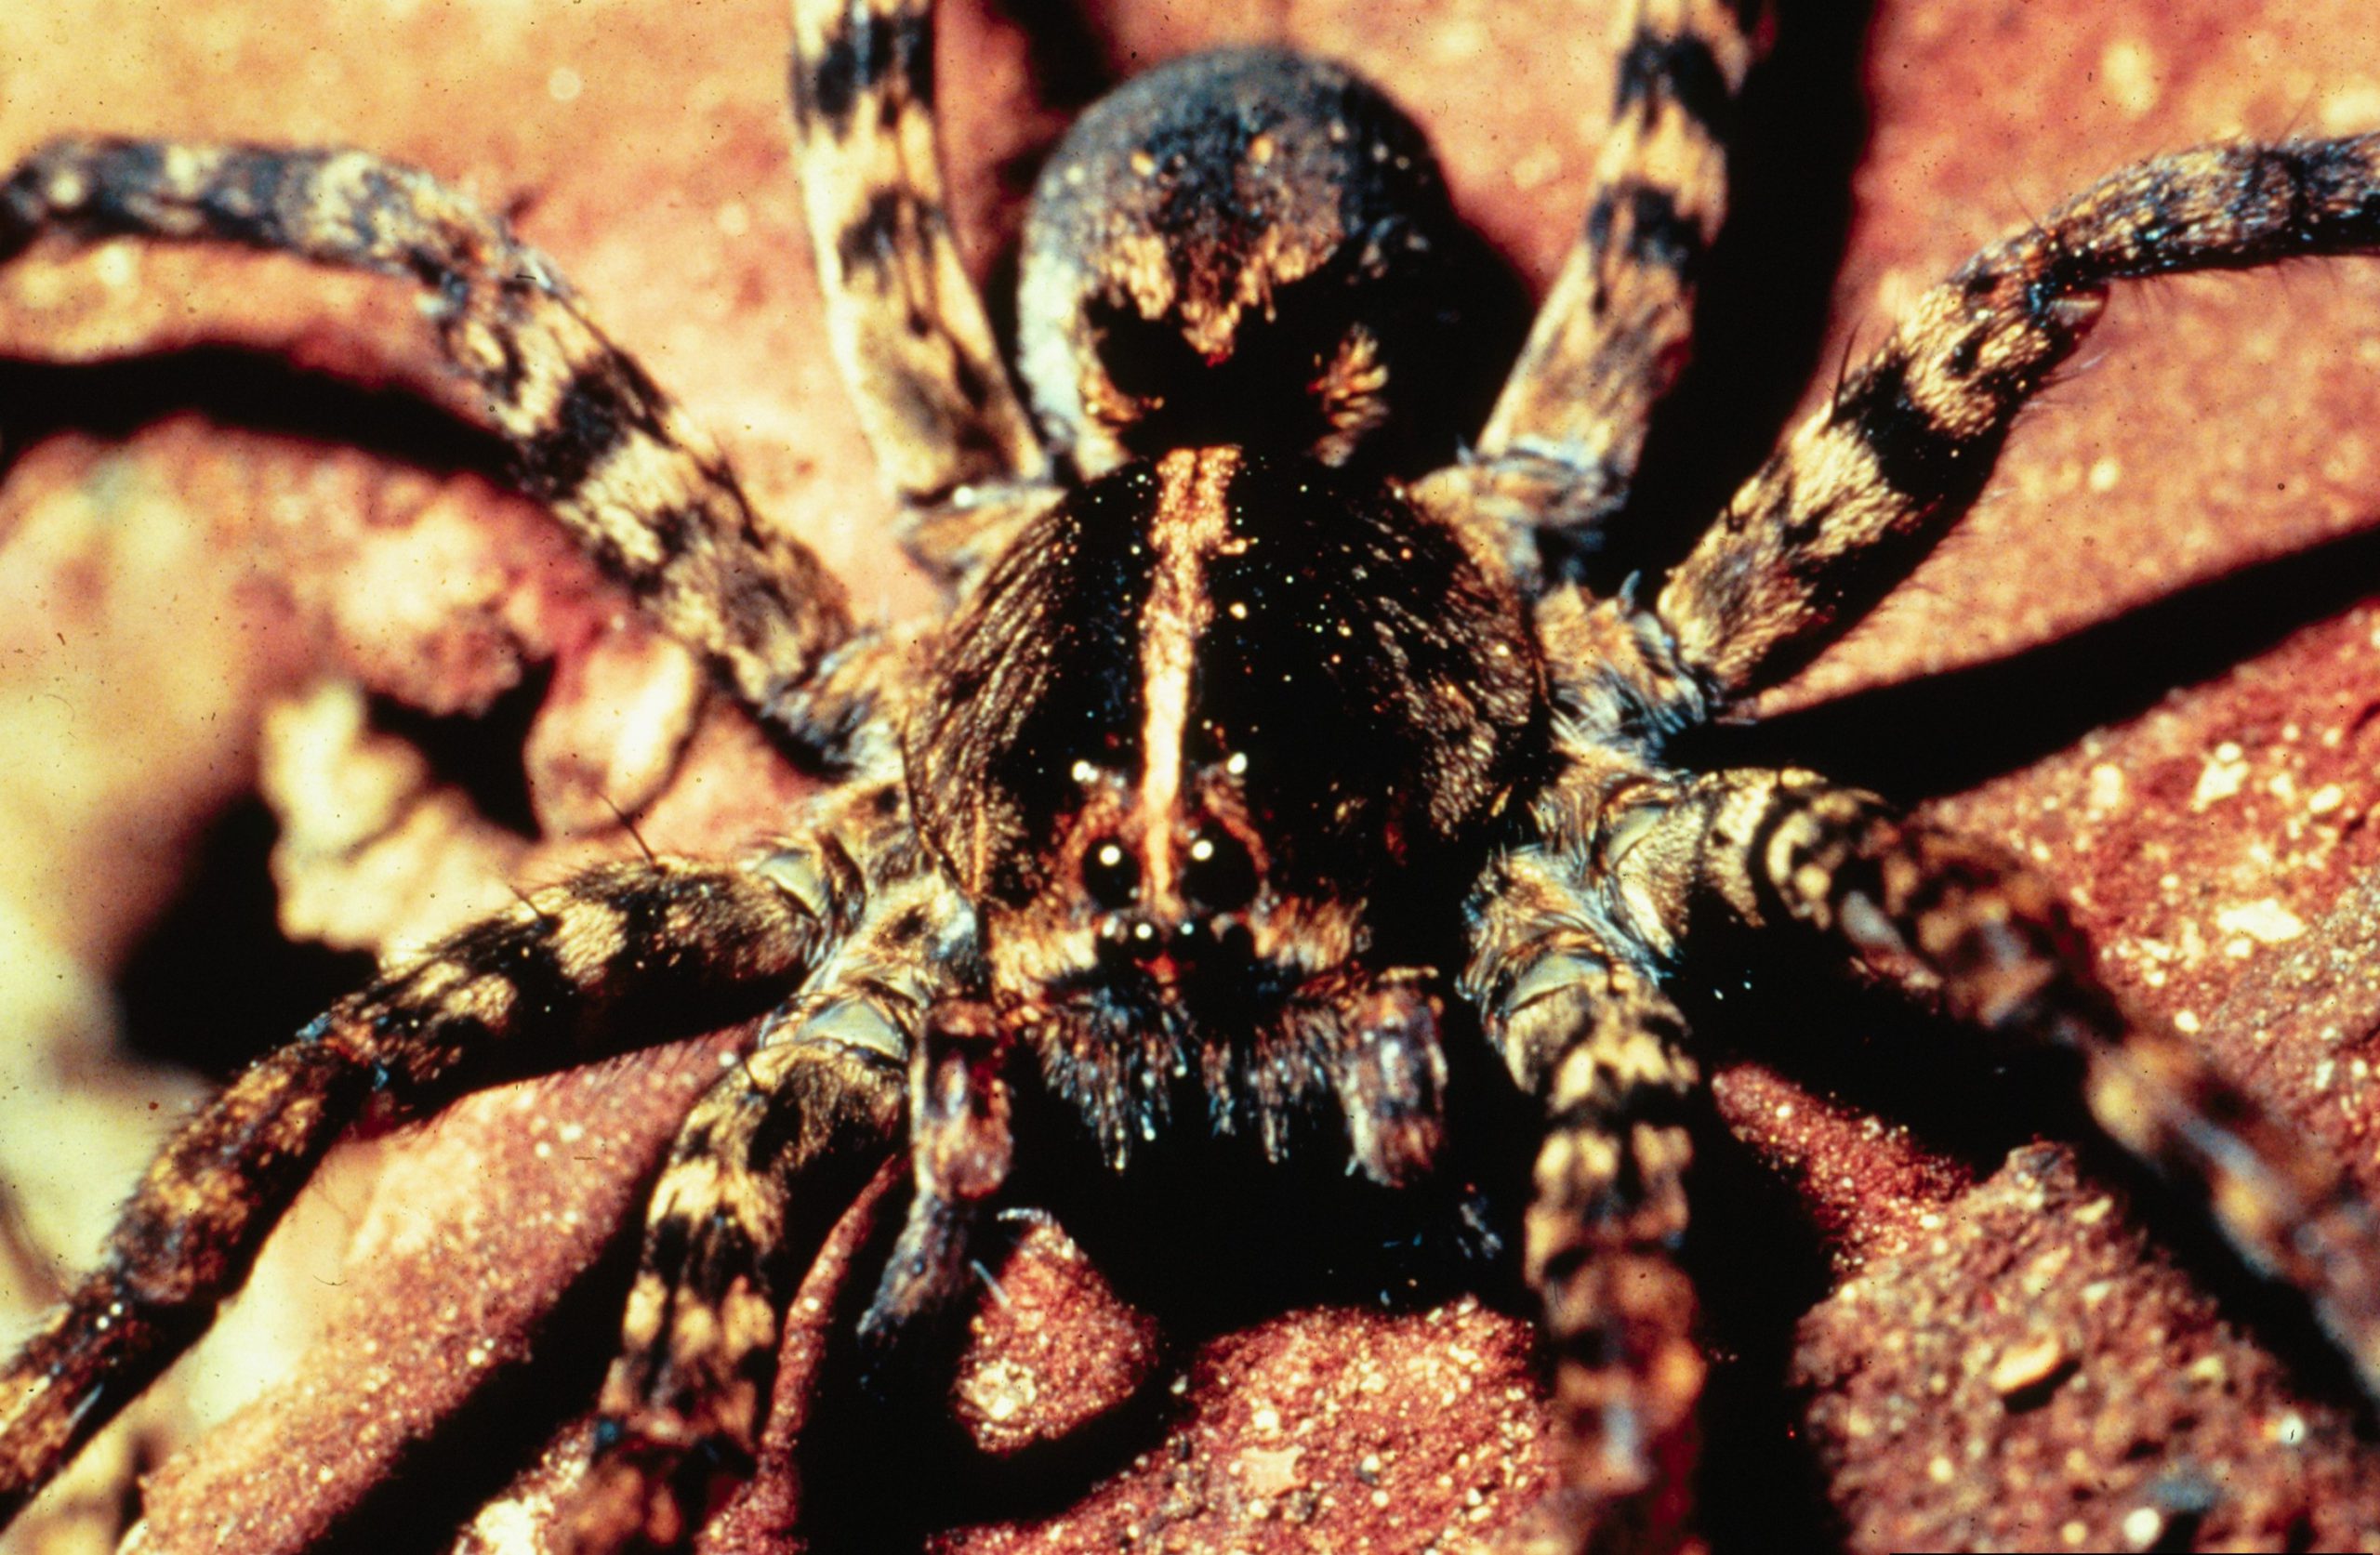 Wolf spiders can be very fast and grow very big, but they live to hunt  cockroaches and other pests - Cambridge Day